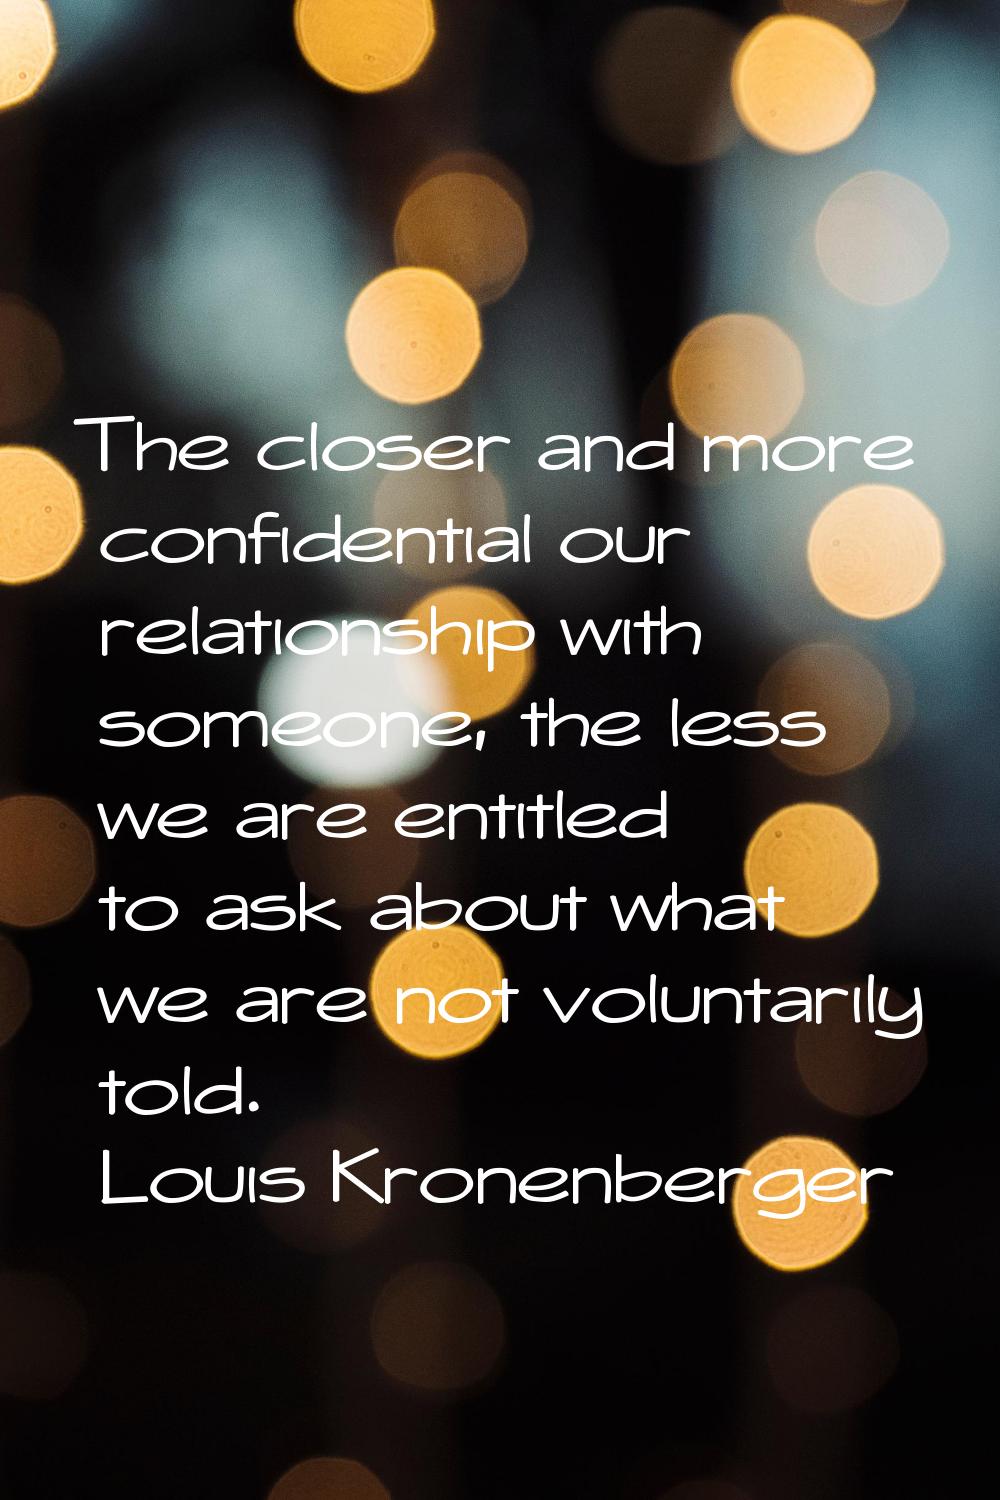 The closer and more confidential our relationship with someone, the less we are entitled to ask abo